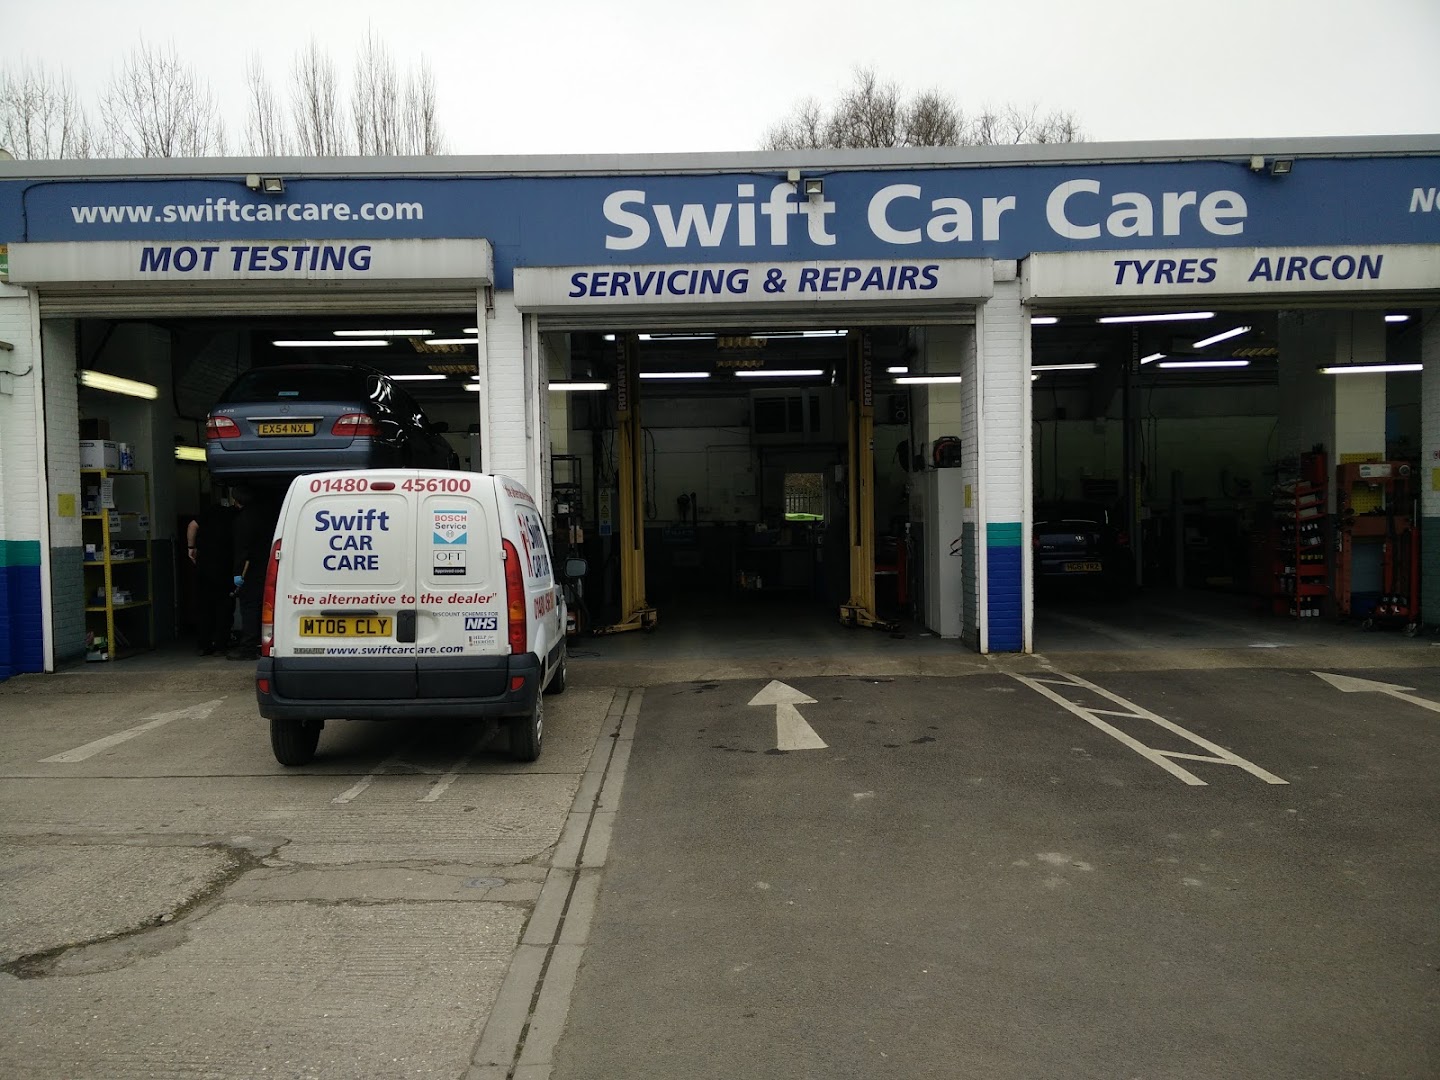 Swift Car Care Services